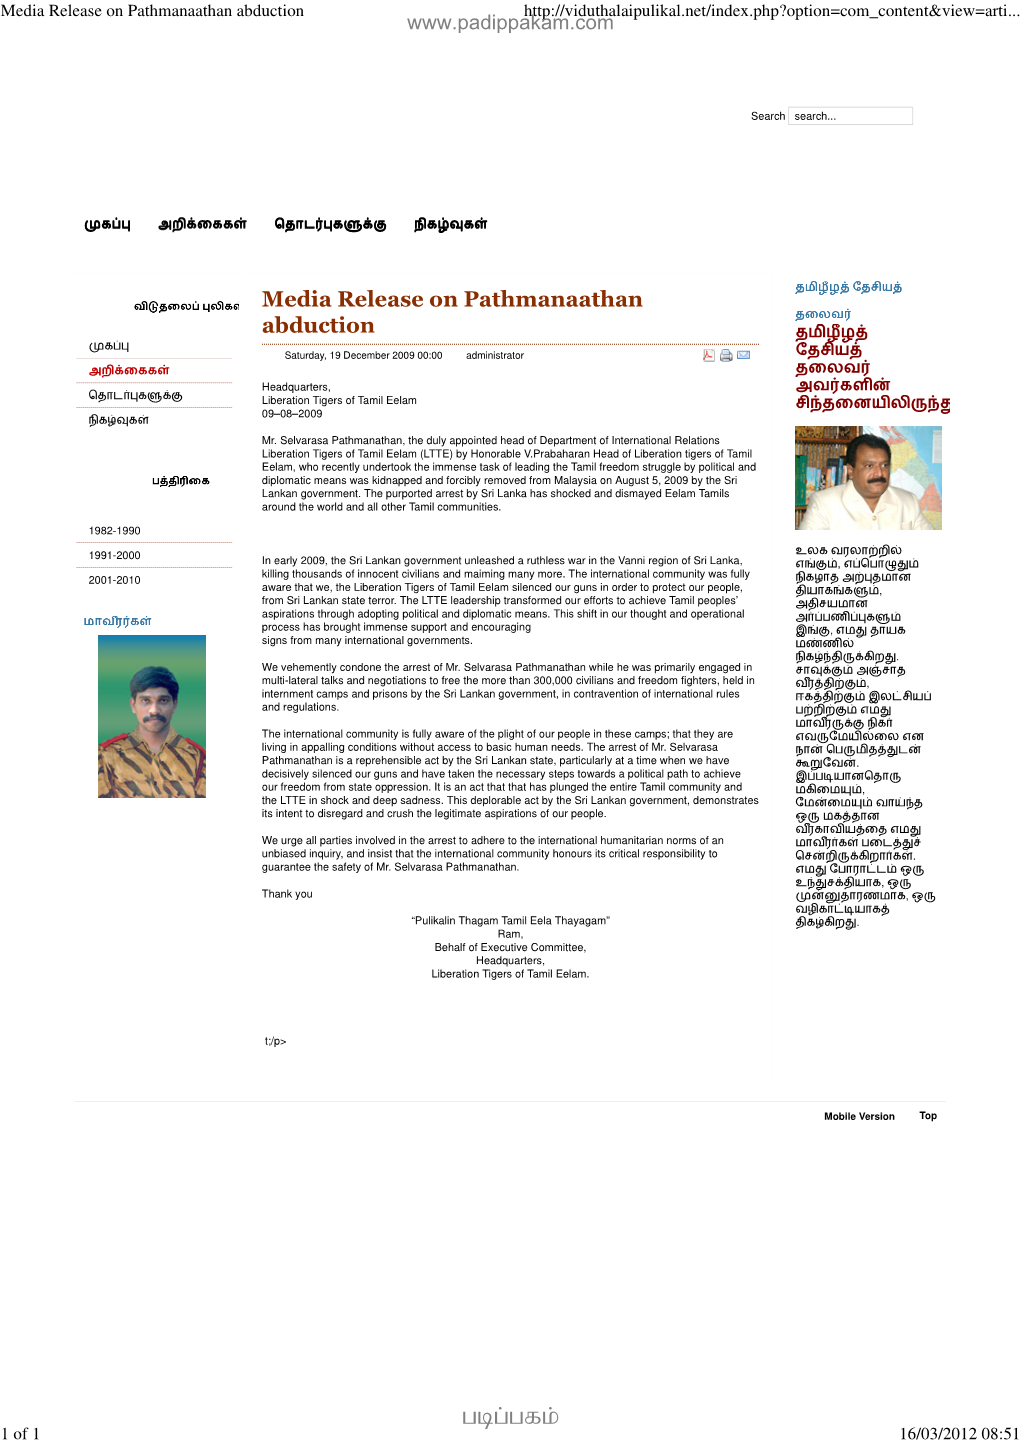 Media Release on Pathmanaathan Abduction